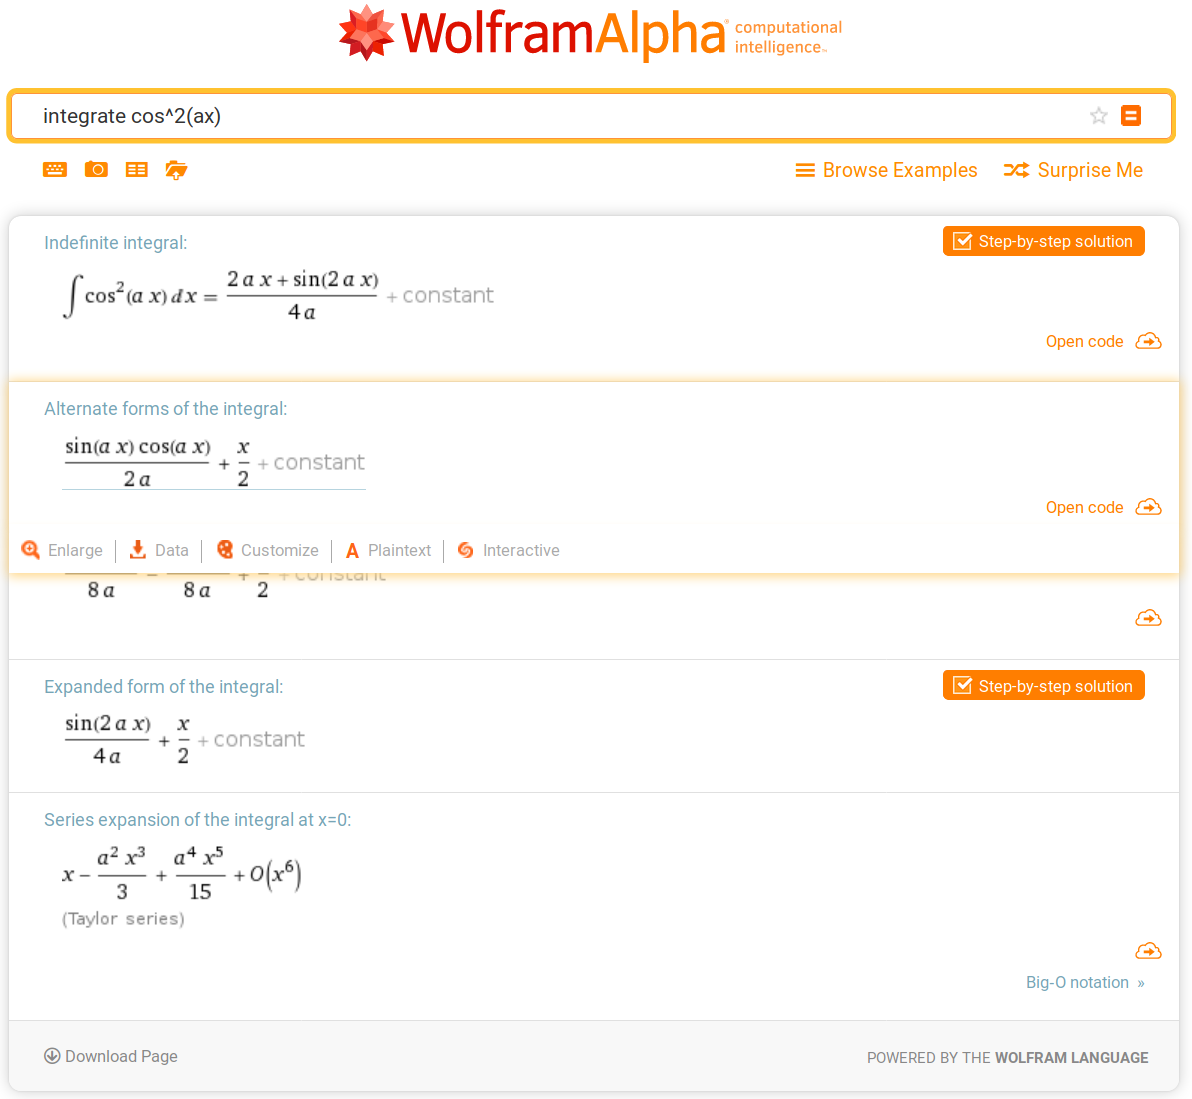 ../../images/fisica2/wolfram.png